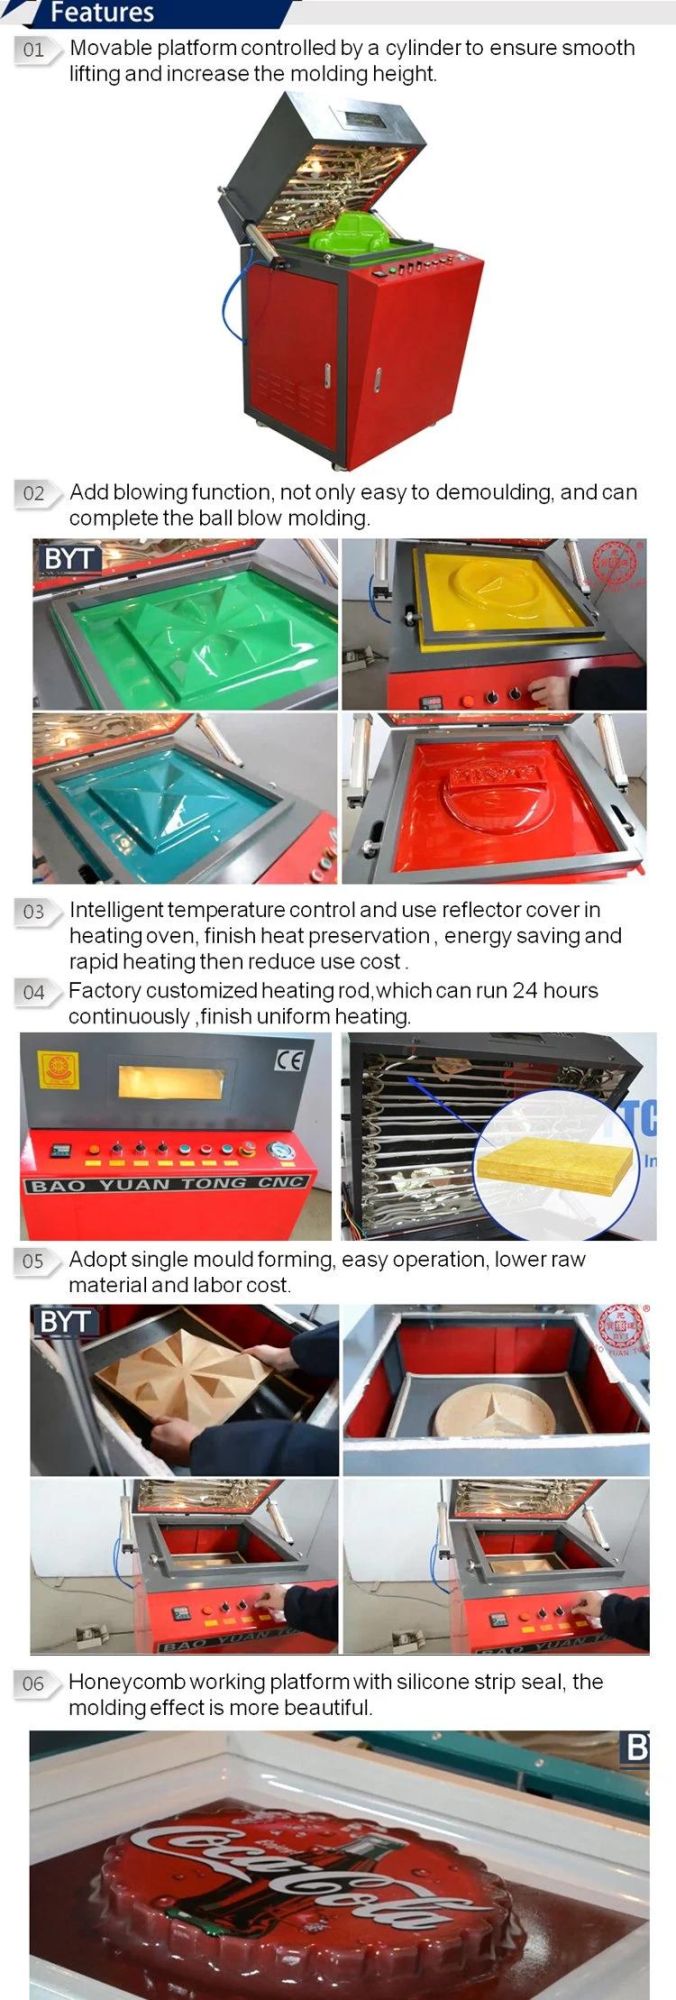 Hot Sale 6060 Type Thermo Vacume Form Machine